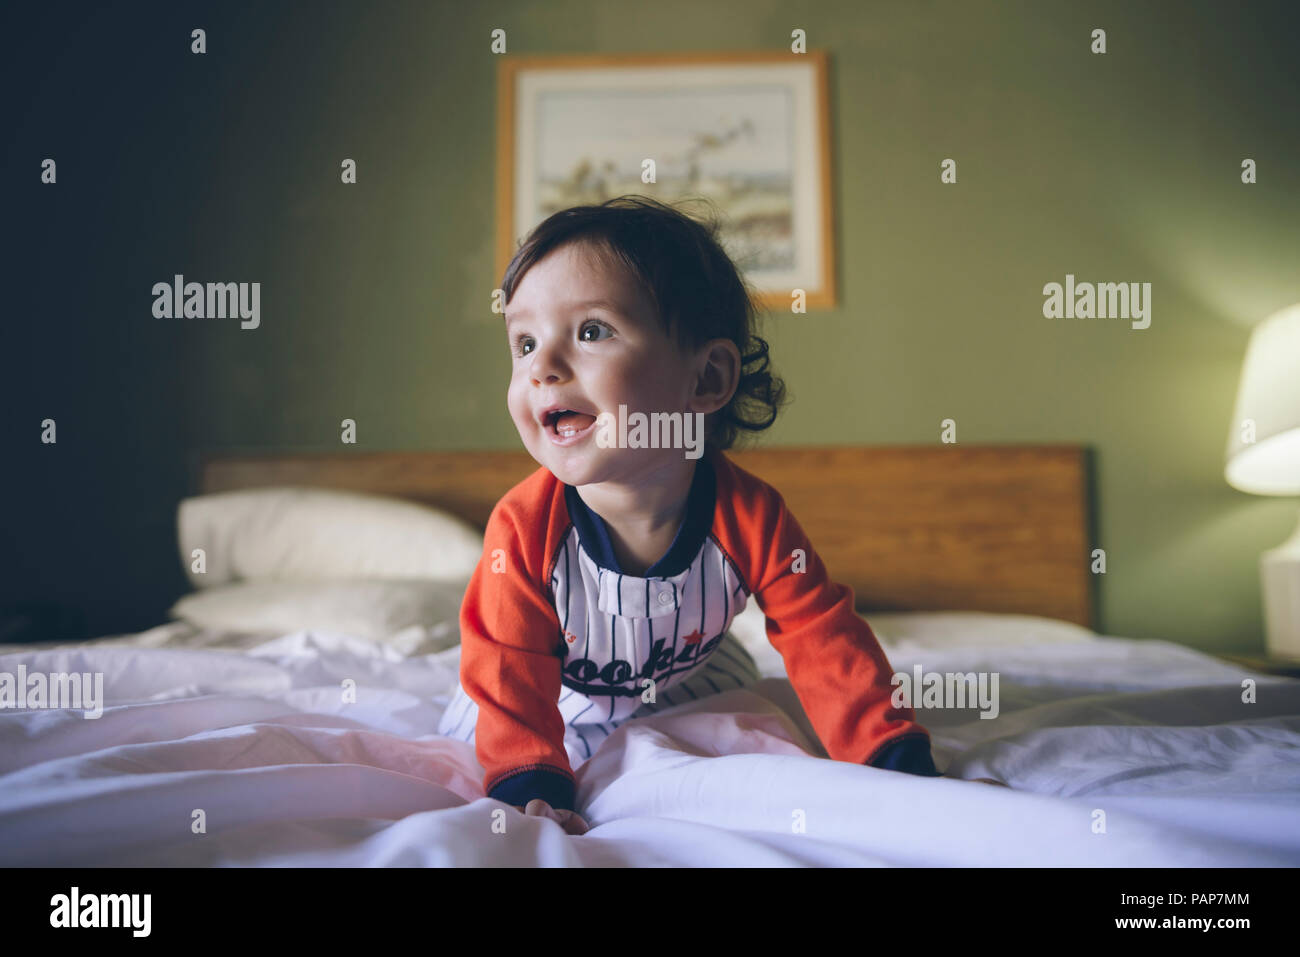 Portrait of baby girl wearing jumpsuit crawling on bed Stock Photo